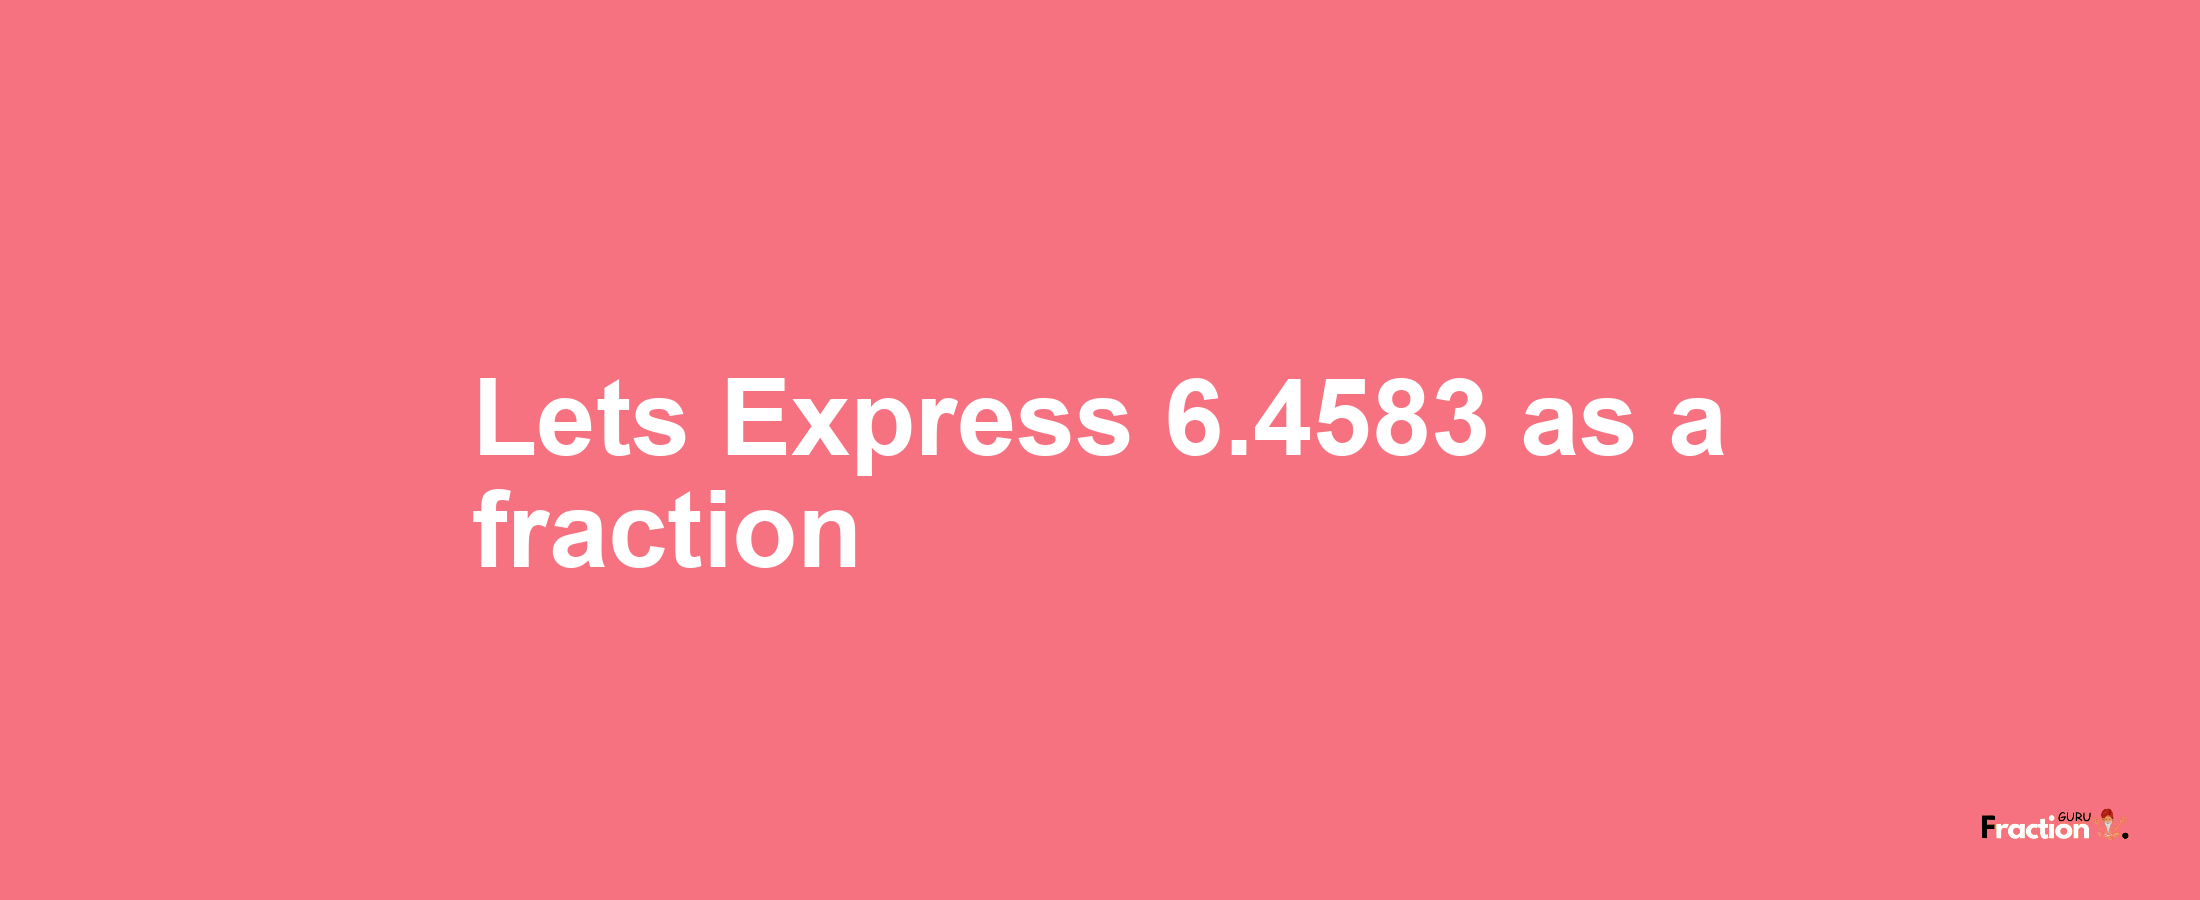 Lets Express 6.4583 as afraction